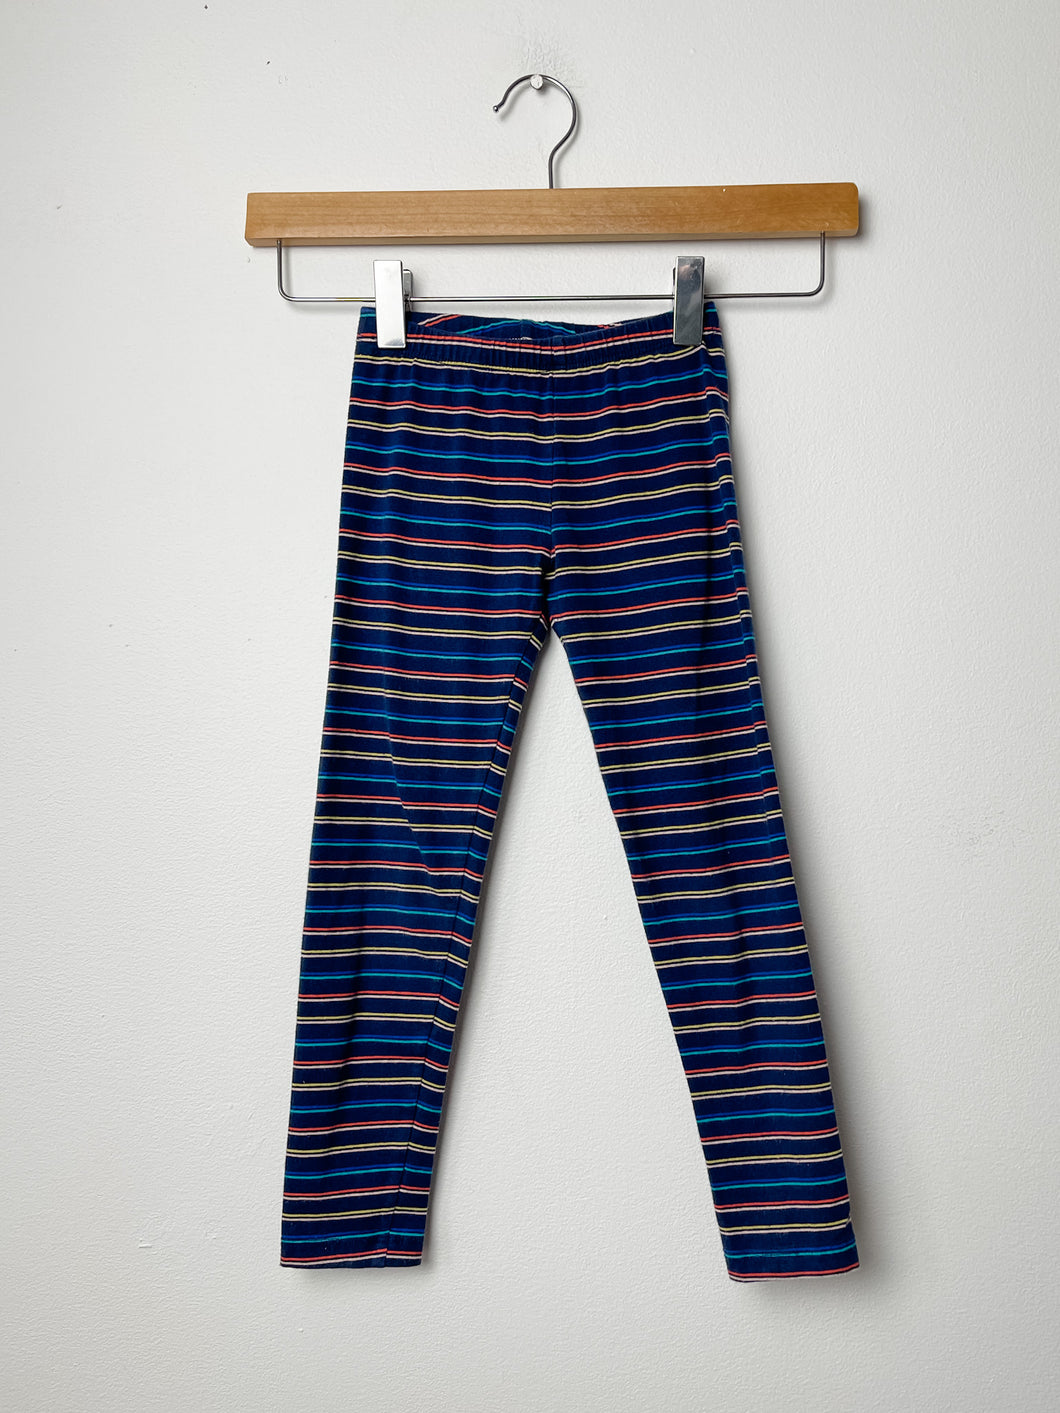 Striped Old Navy Leggings Size 5T